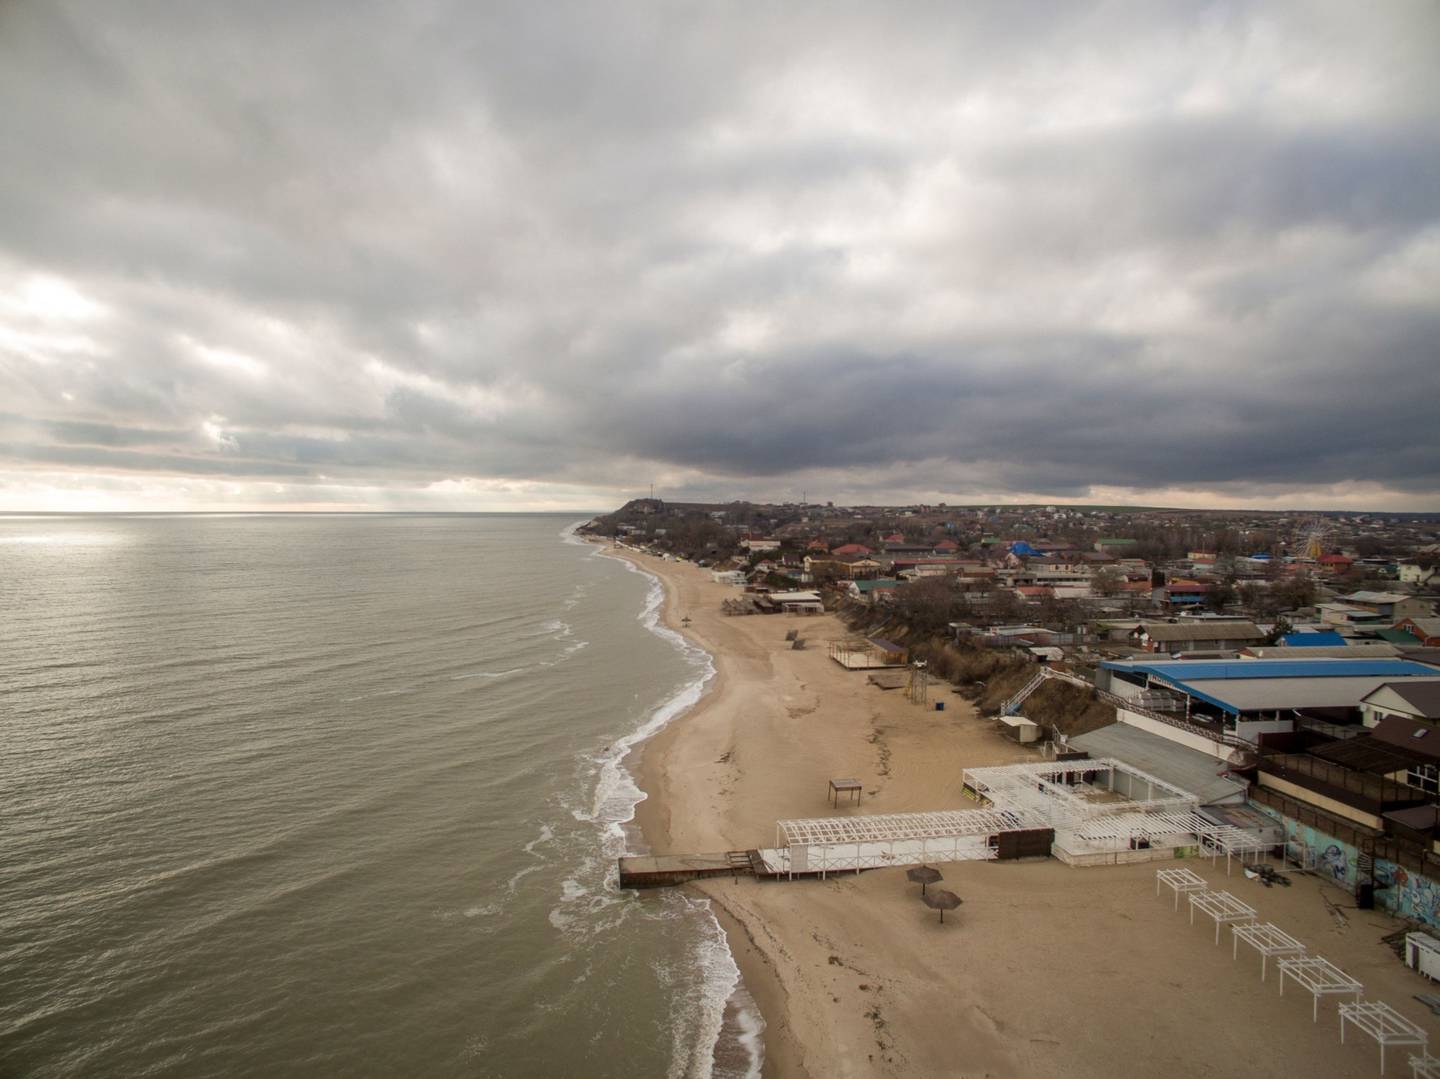 The Sea of Azov shoreline at a beach in Urzuf, on Jan. 18. The resort is at the deepest point of the bay stretching between Mariupol and Berdyansk.dfd